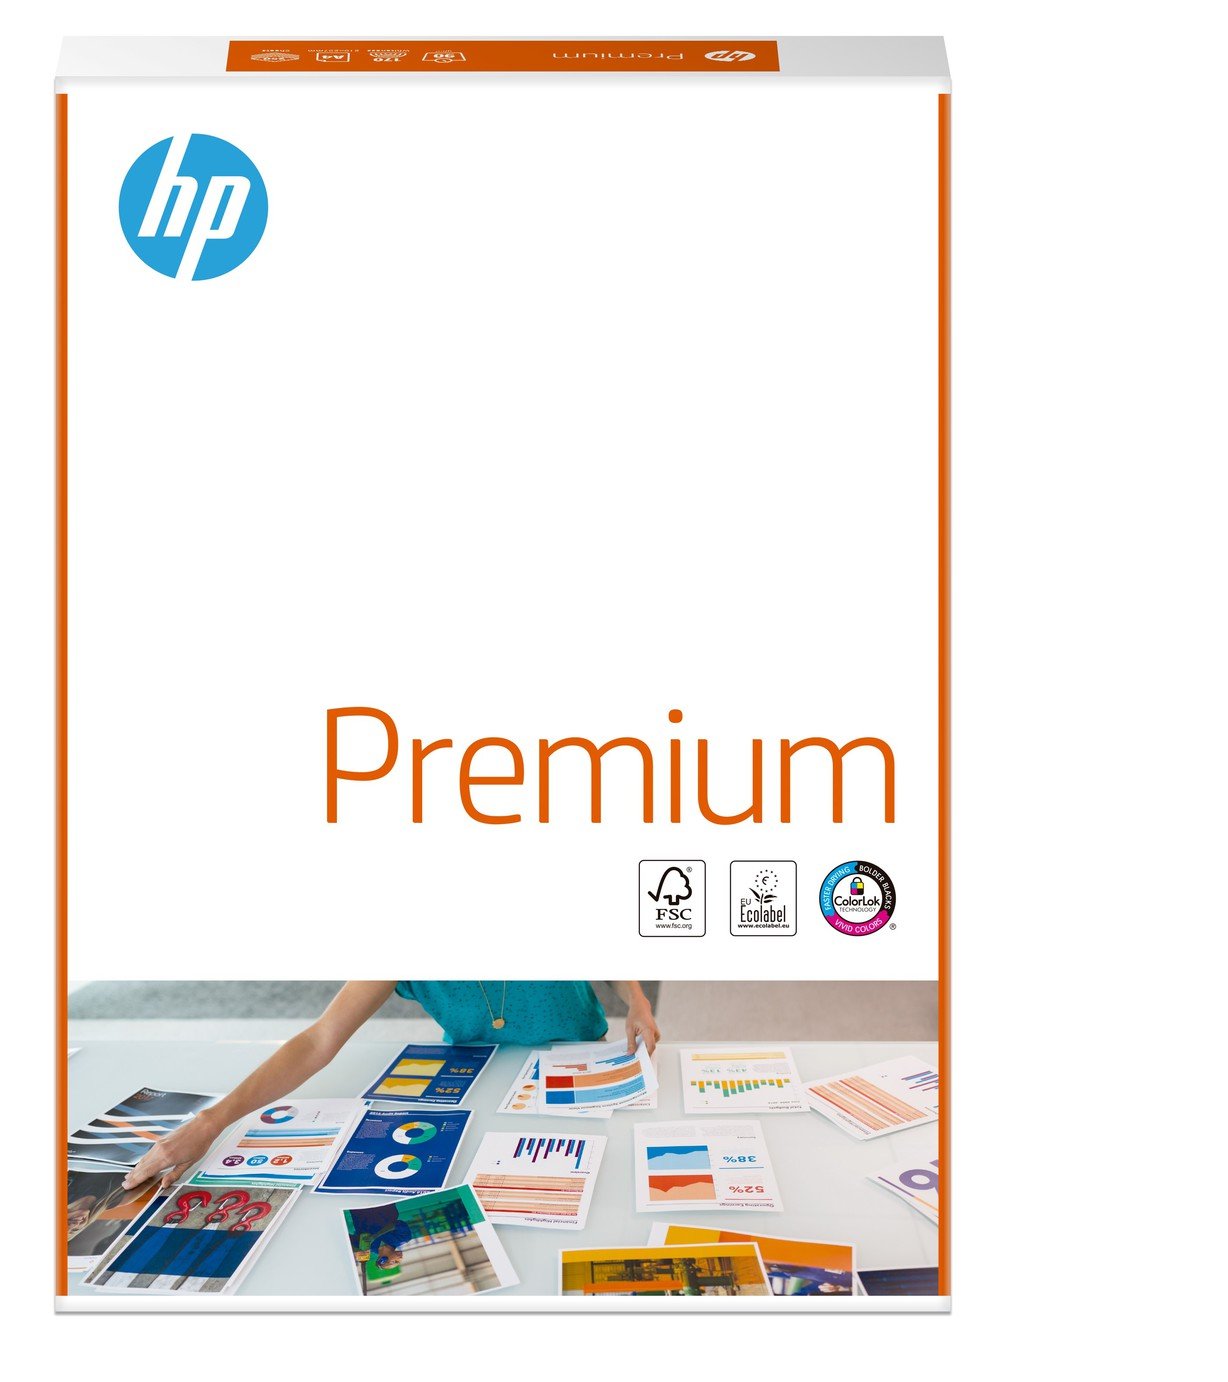 HP Premium Paper A4 90gsm 250 Sheets Review